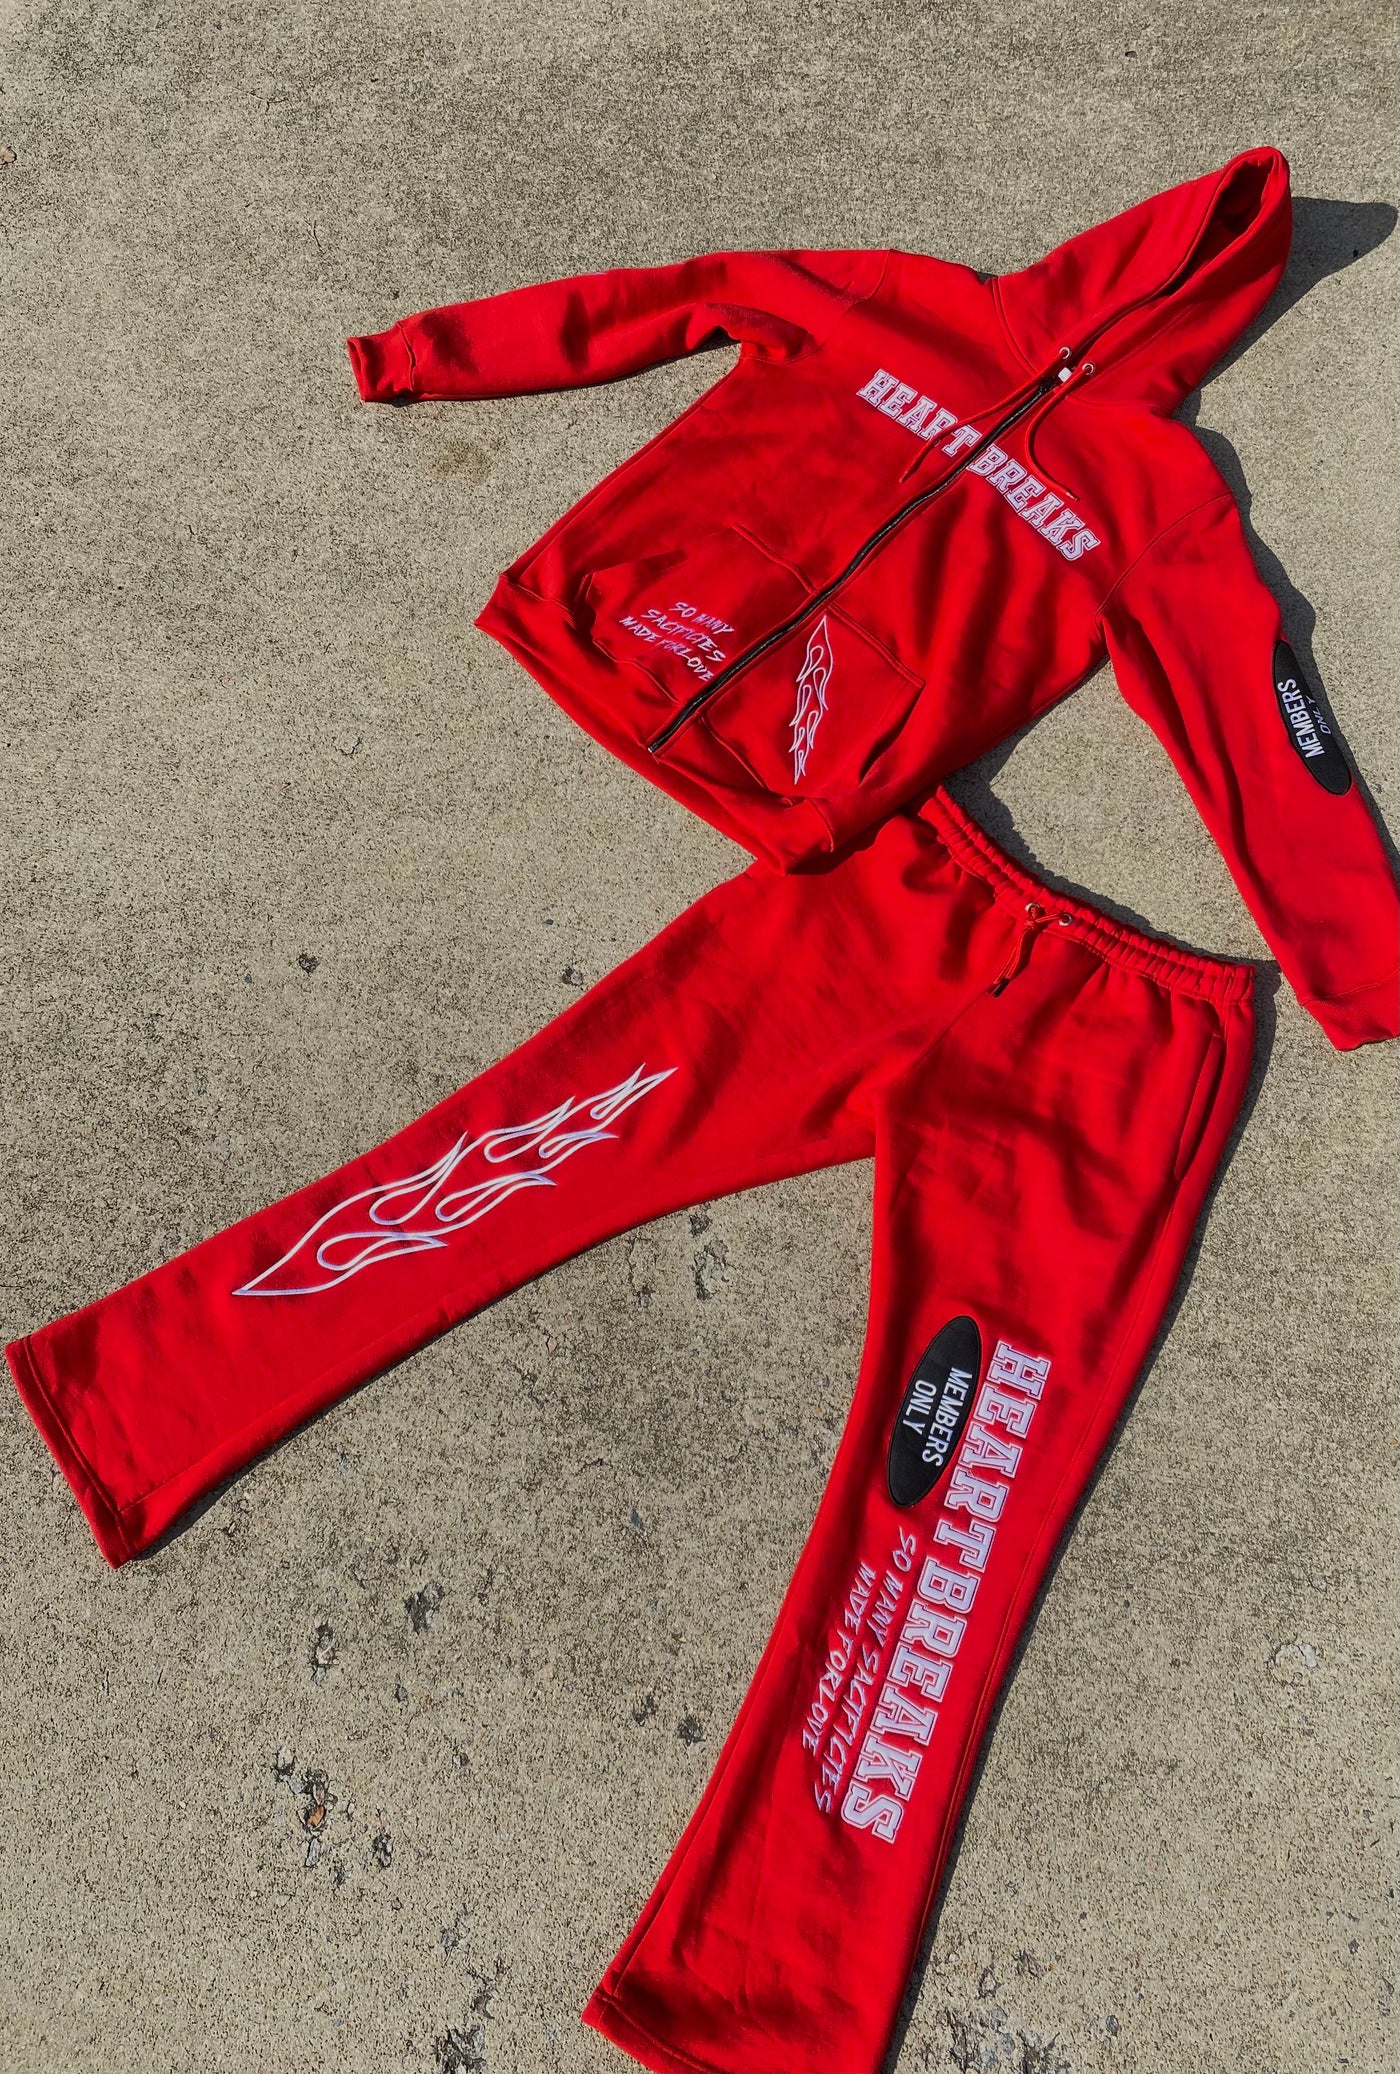 NMHB flame "Red" Zip up Buy 1 Get One 40% off at checkout